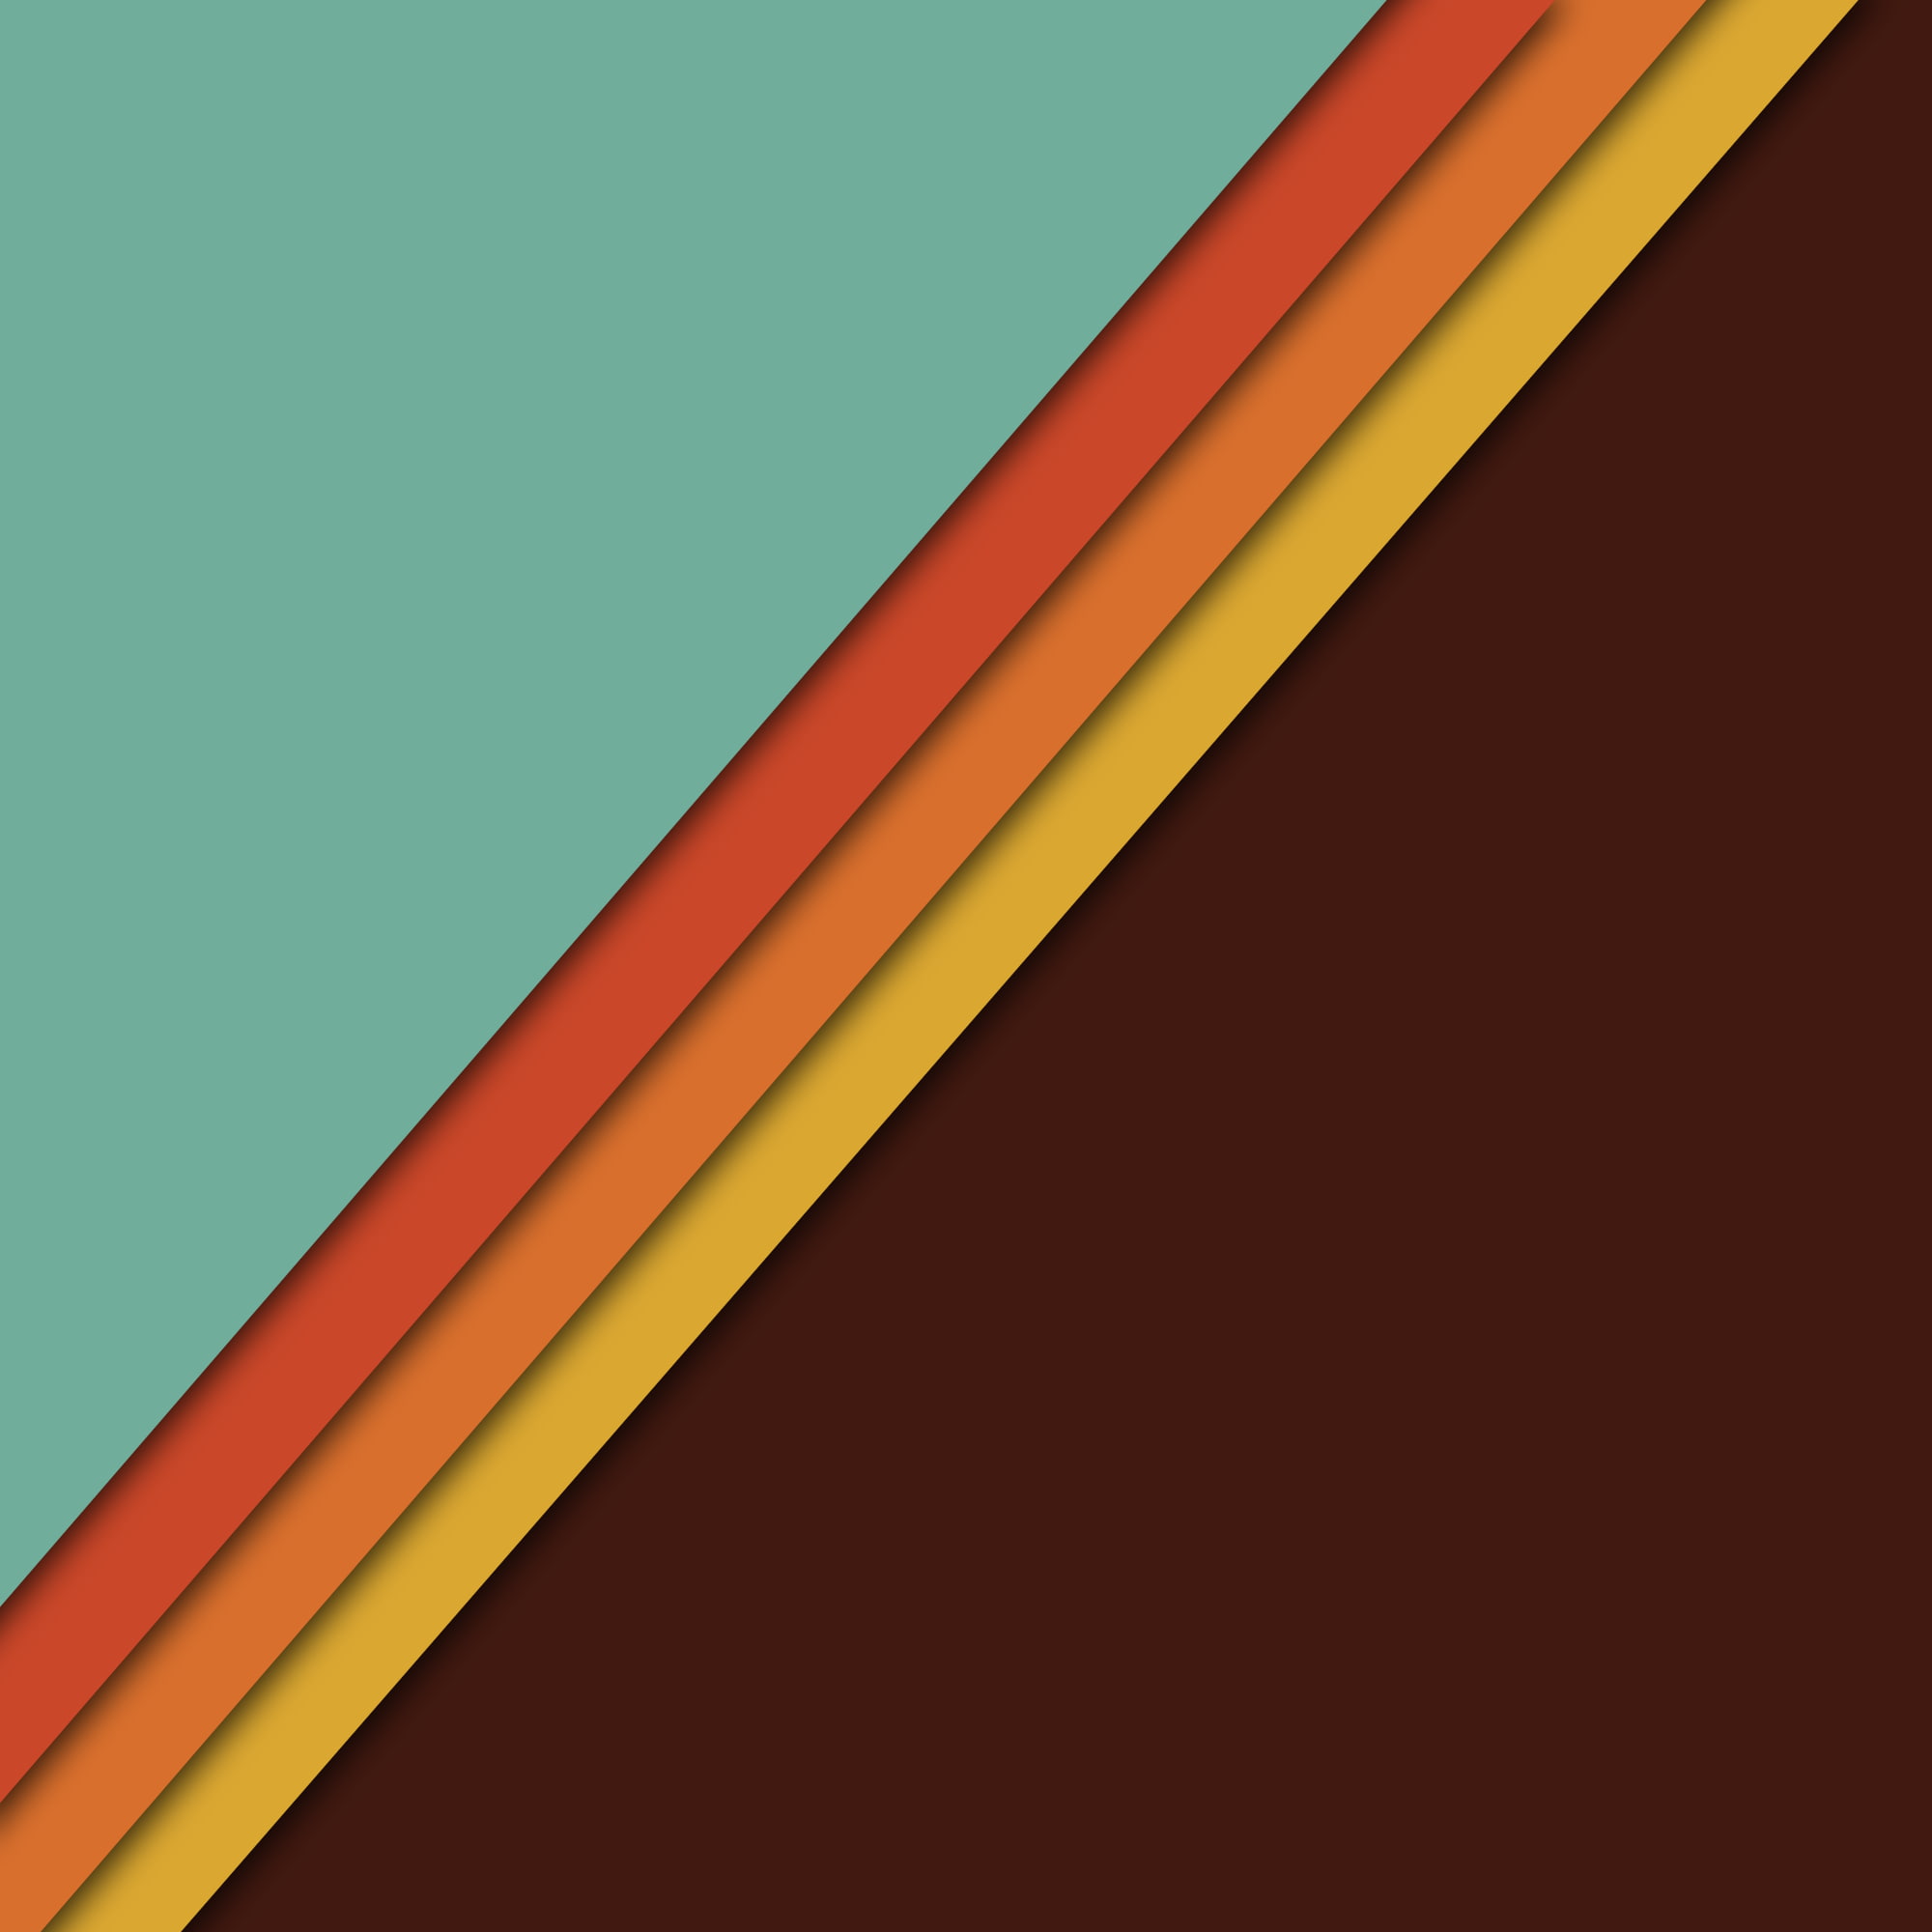 Android L, Android (operating system), 1976, simple, multi colored